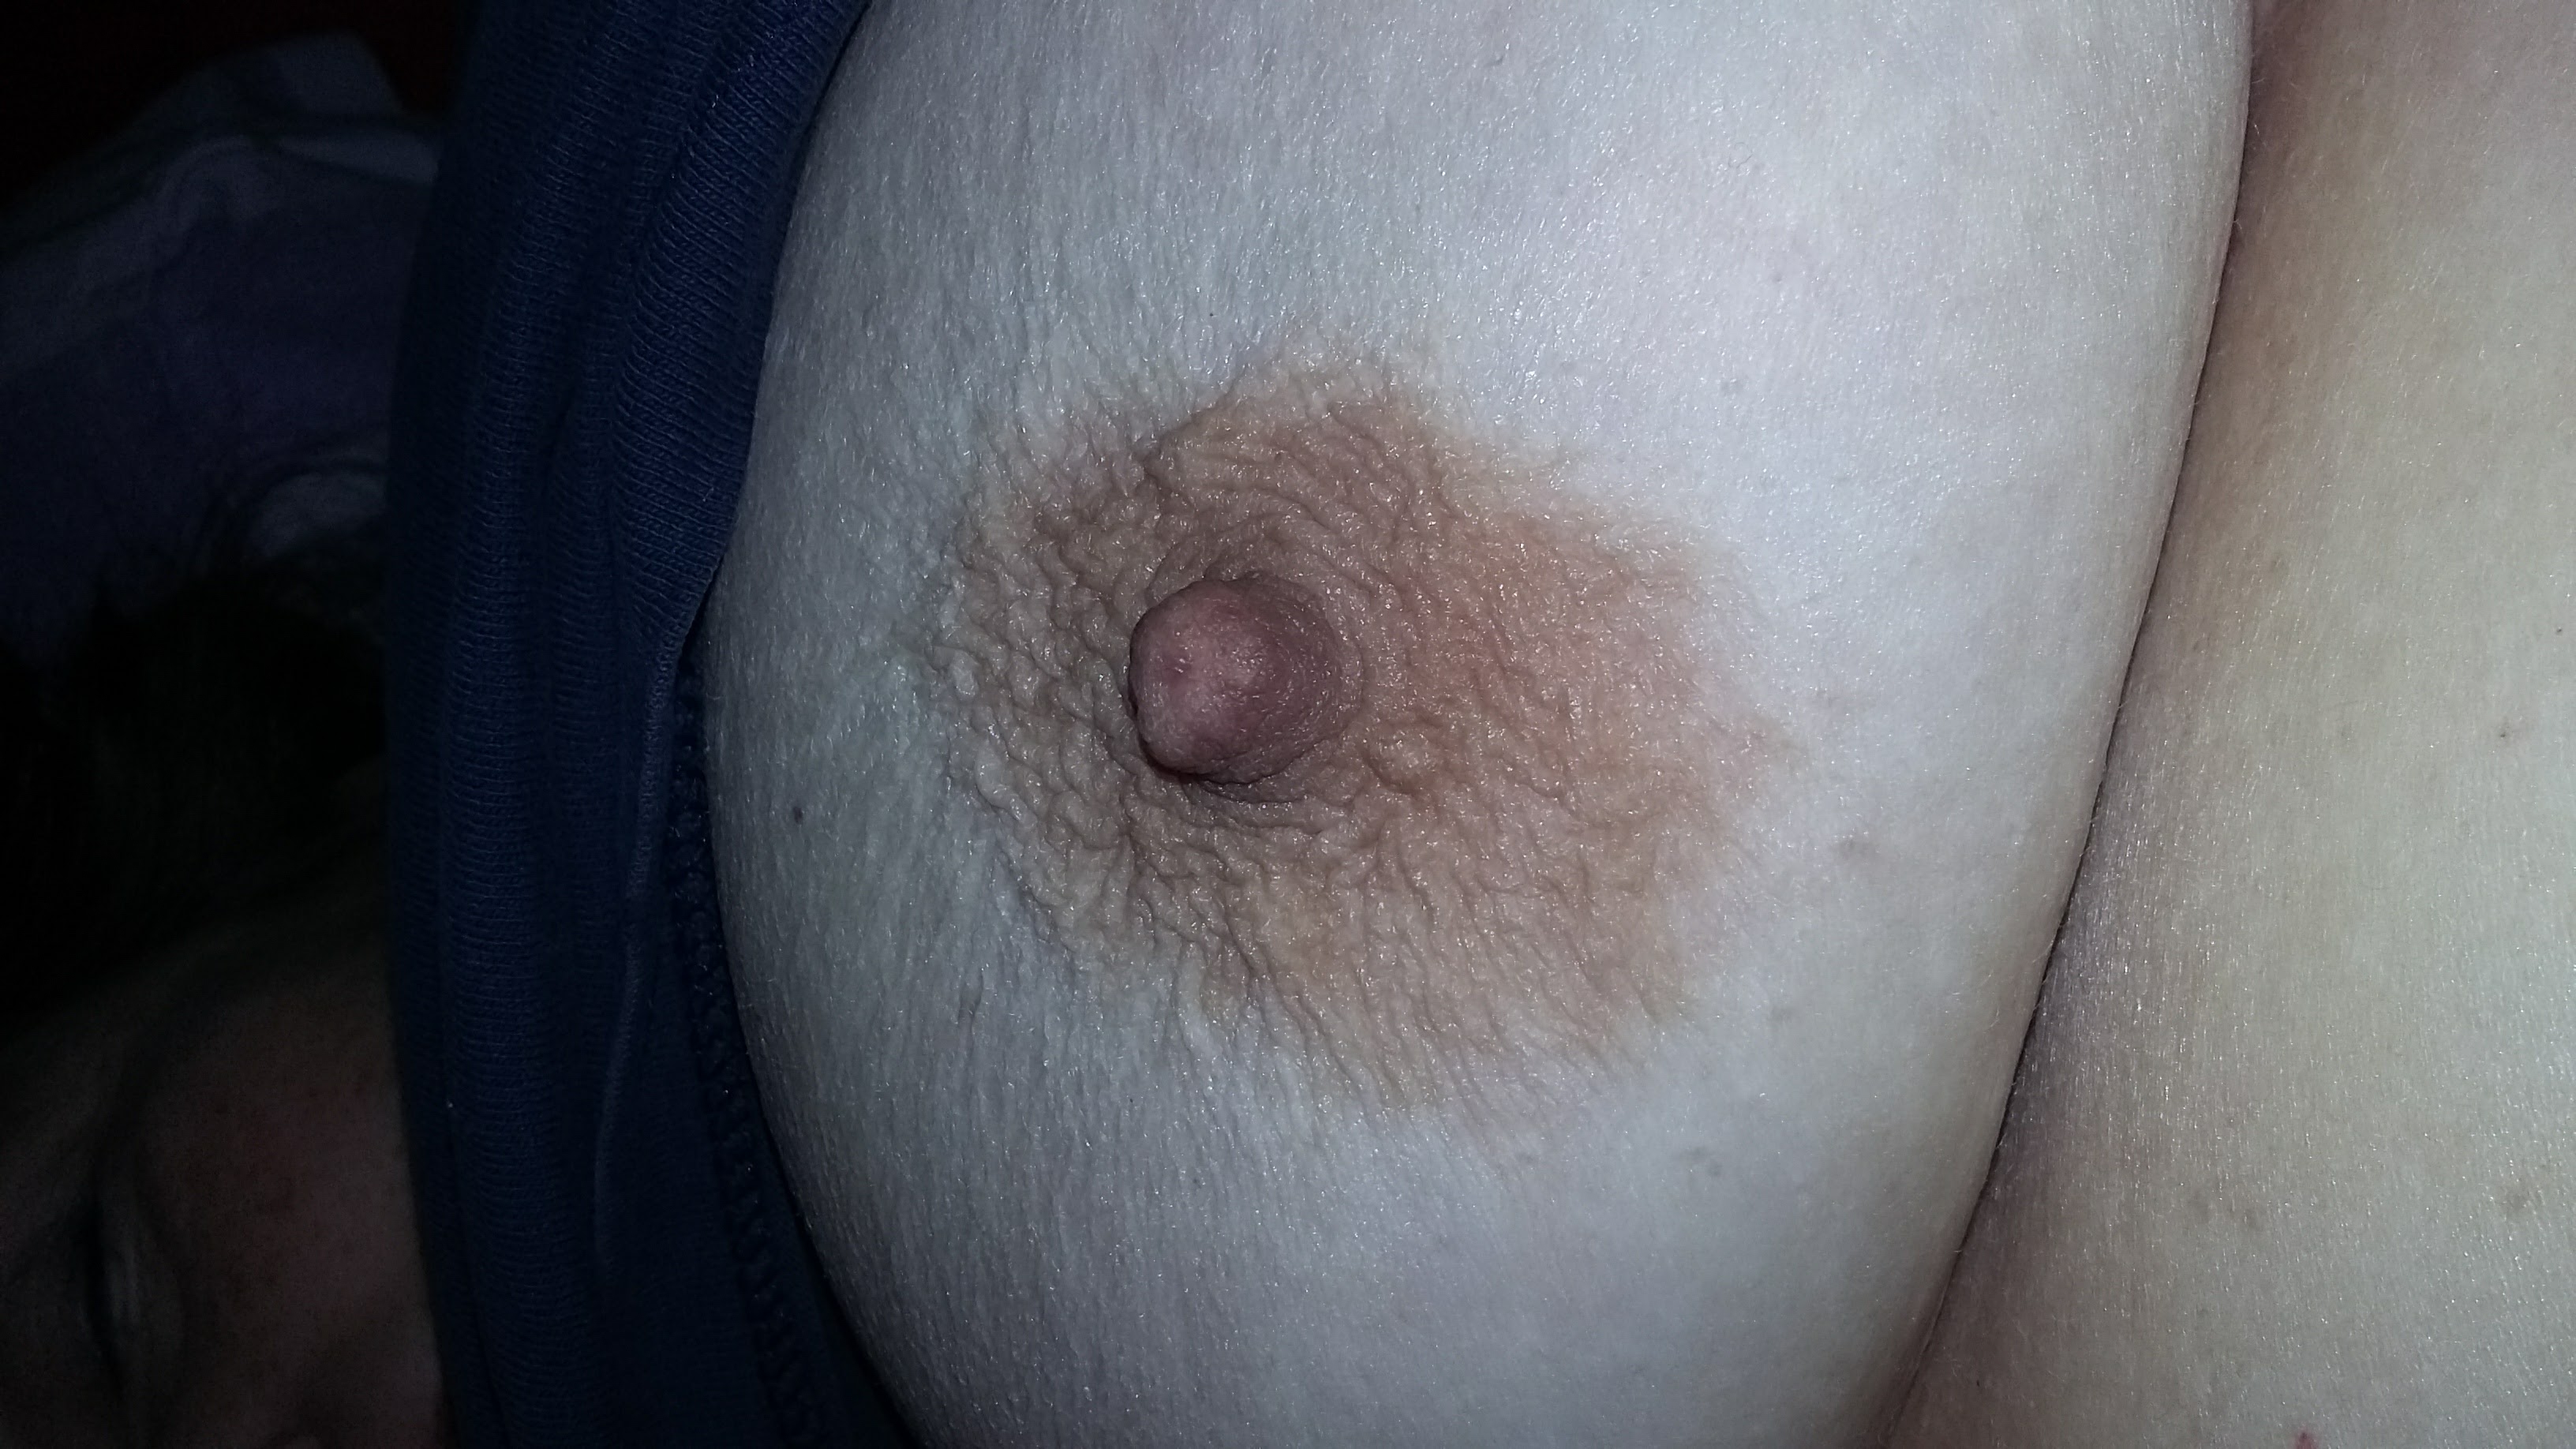 My wife's tits